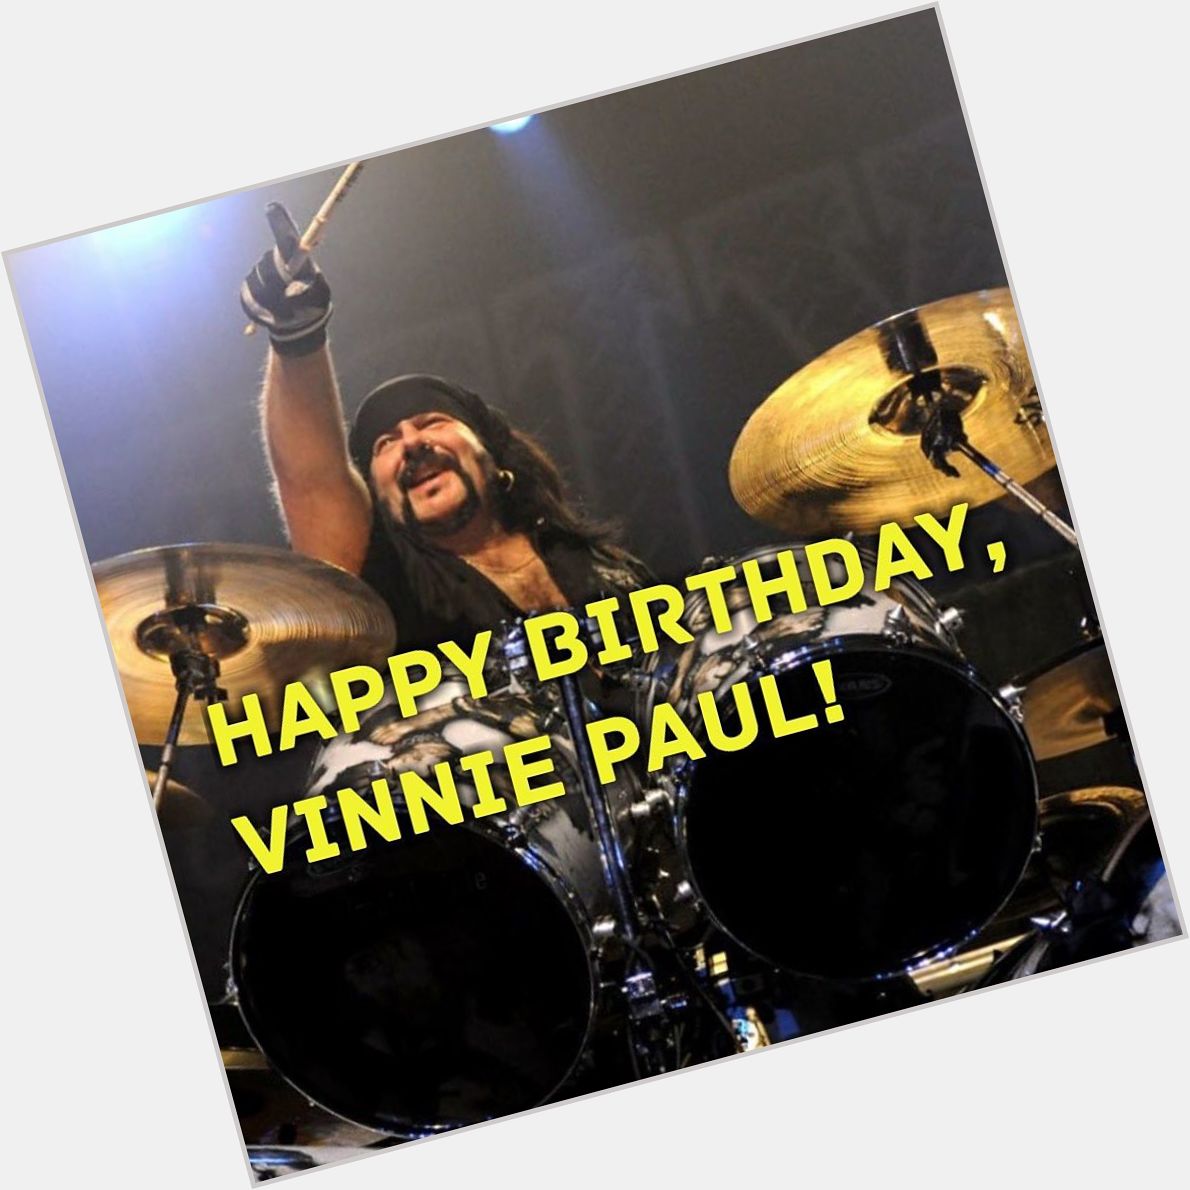 Happy Birthday
Former Drummer for Pantera
Vinnie Paul 
Born March 11th, 1964
Paased away june 22nd, 2018 